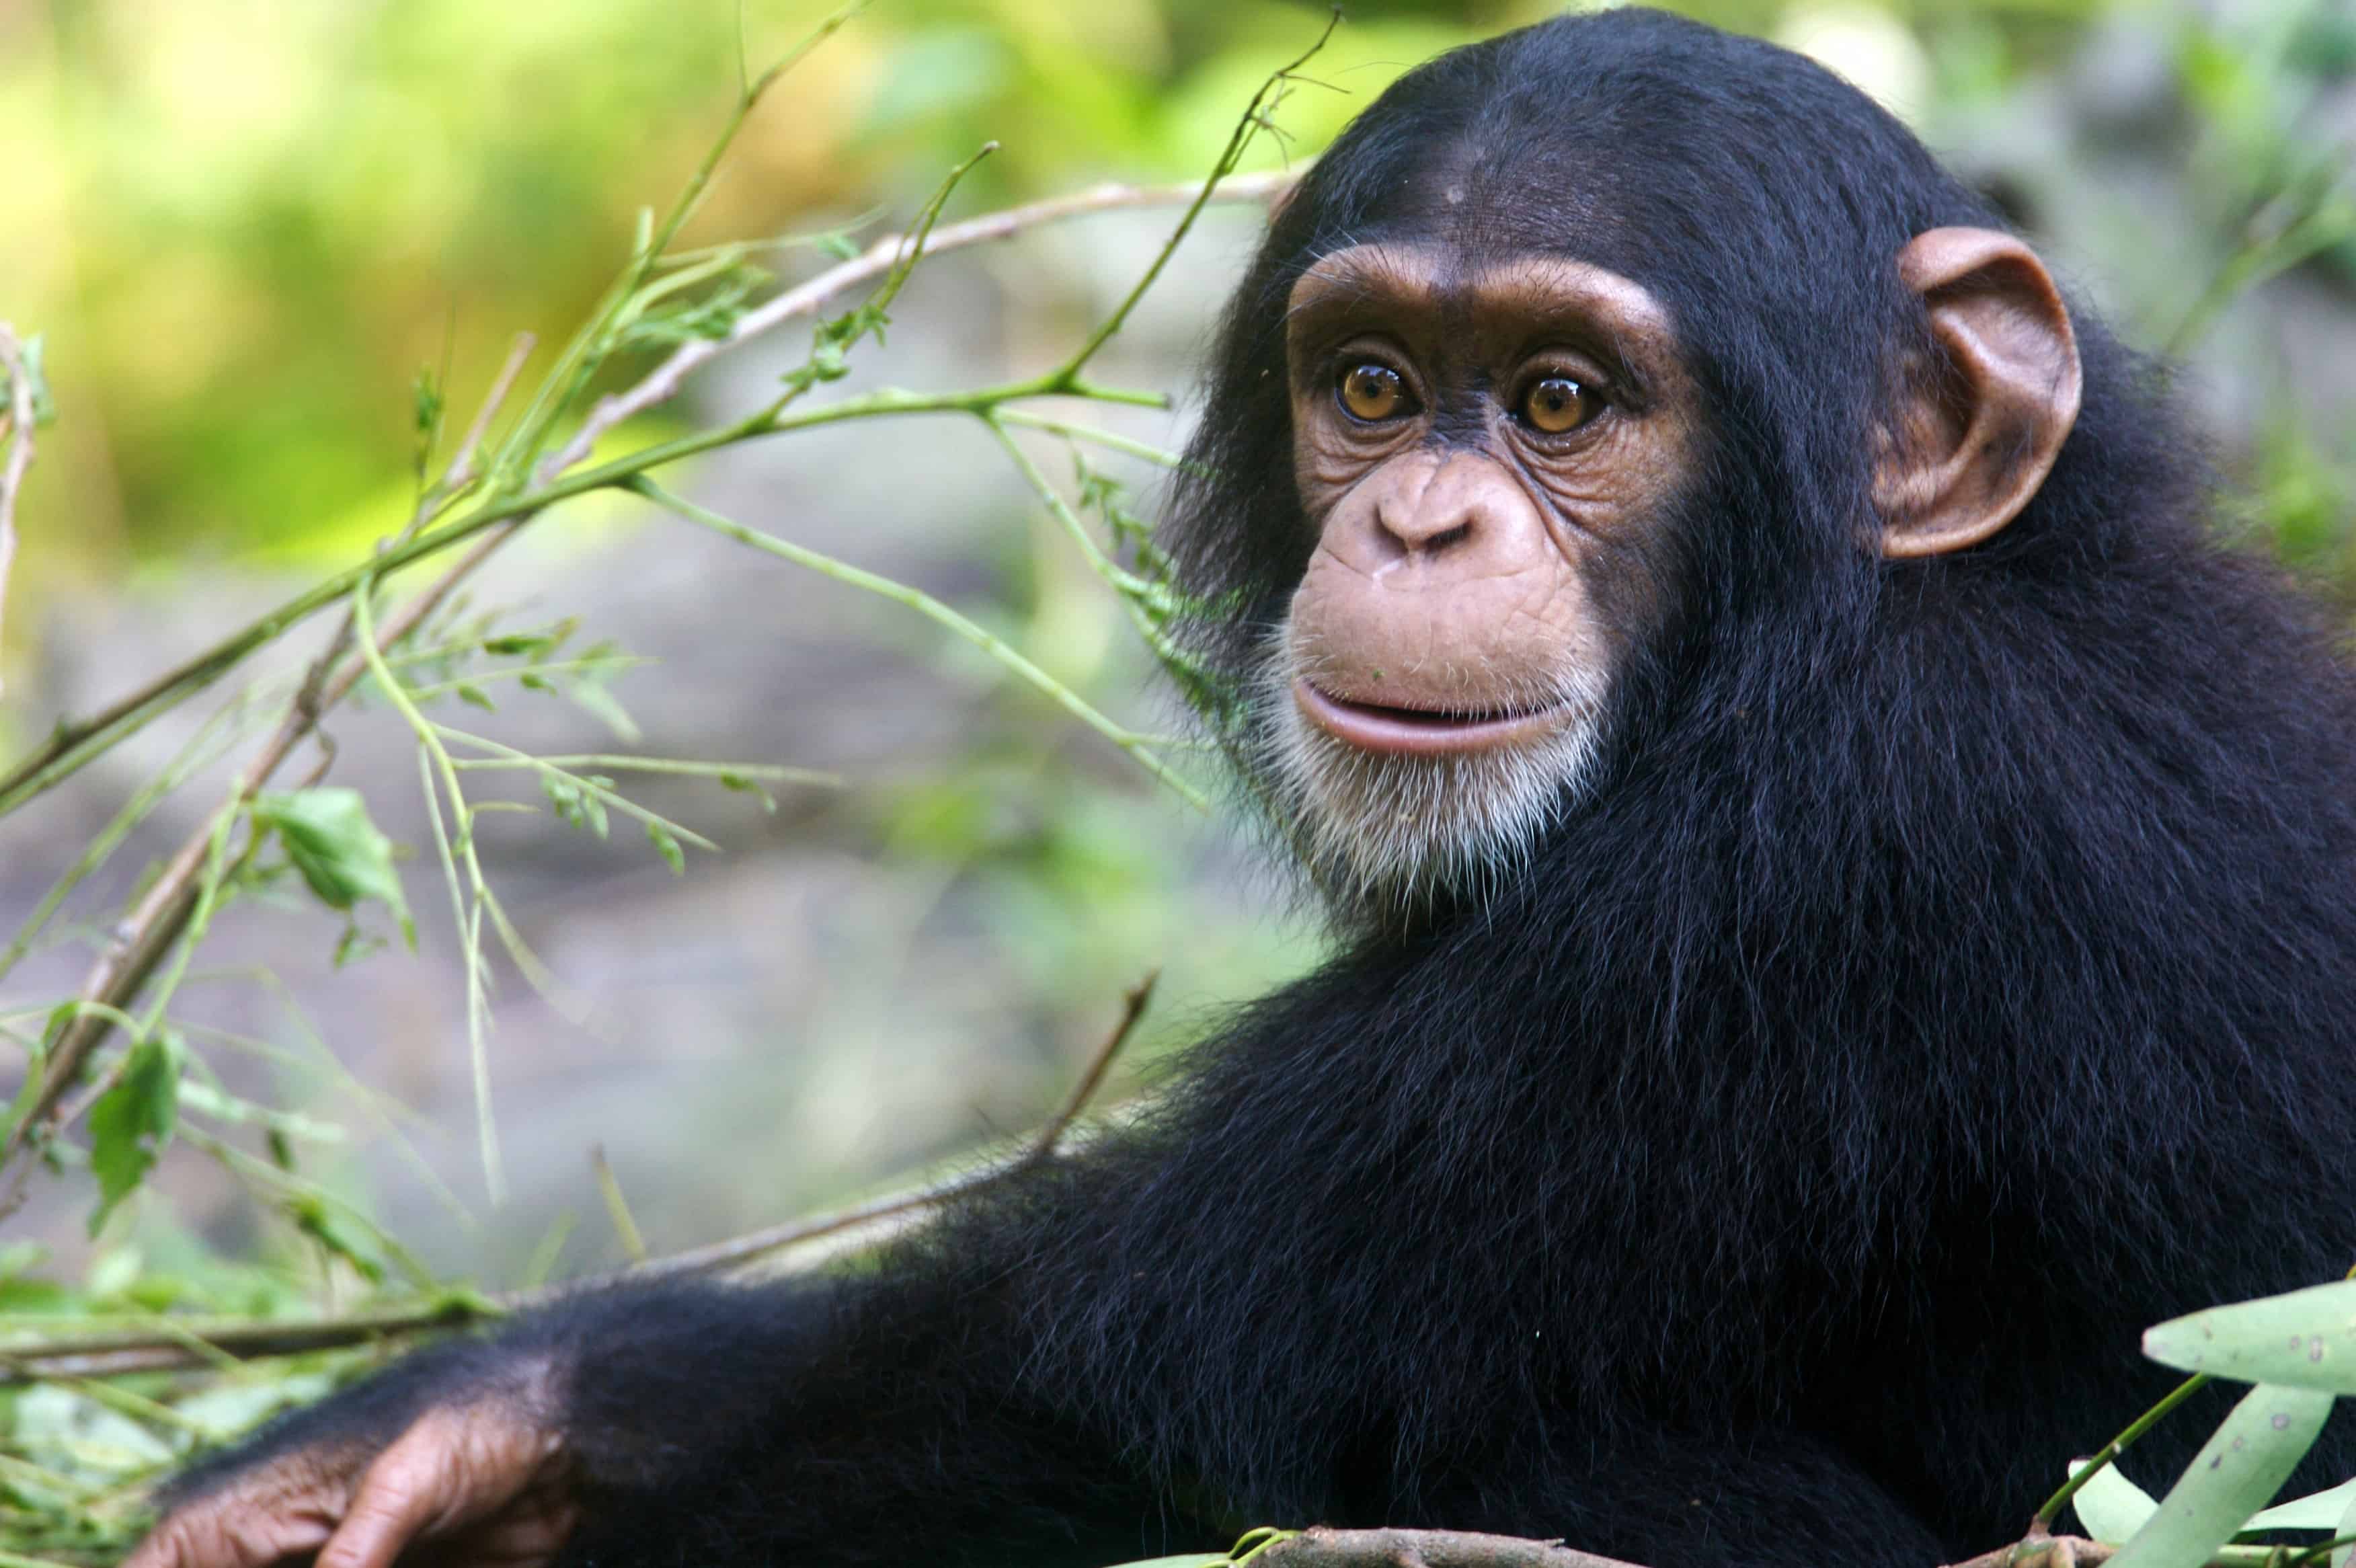 What are some interesting facts about a chimpanzee?